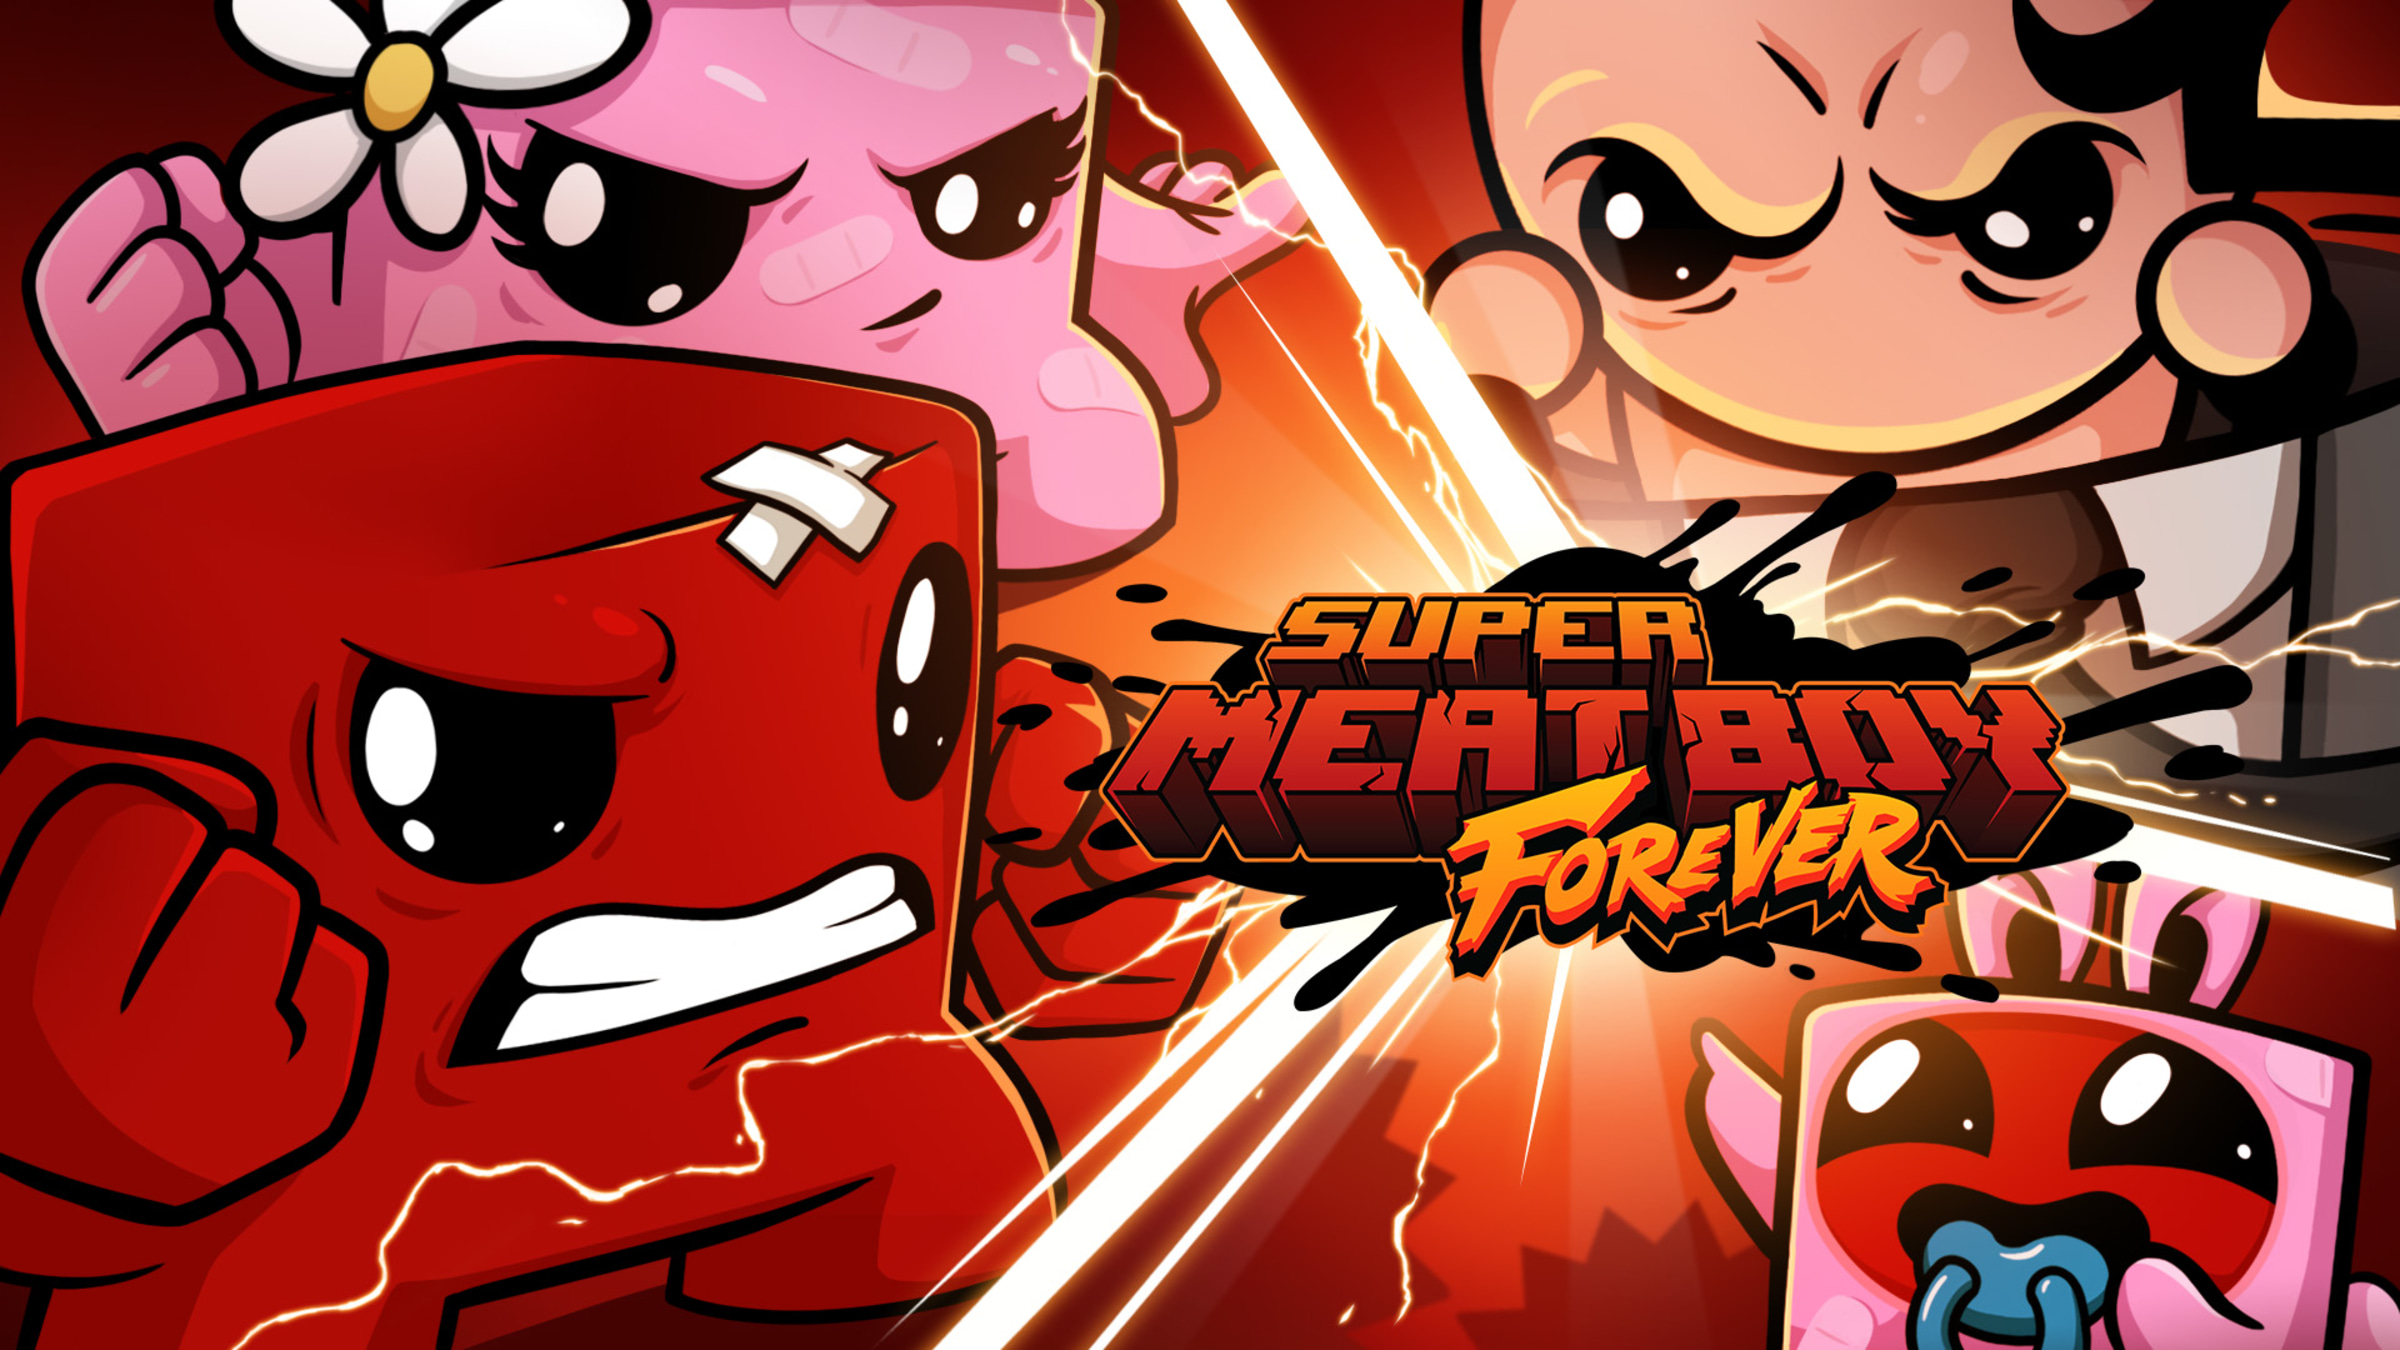 Super Meat Forever for Nintendo Switch - Nintendo Official Site